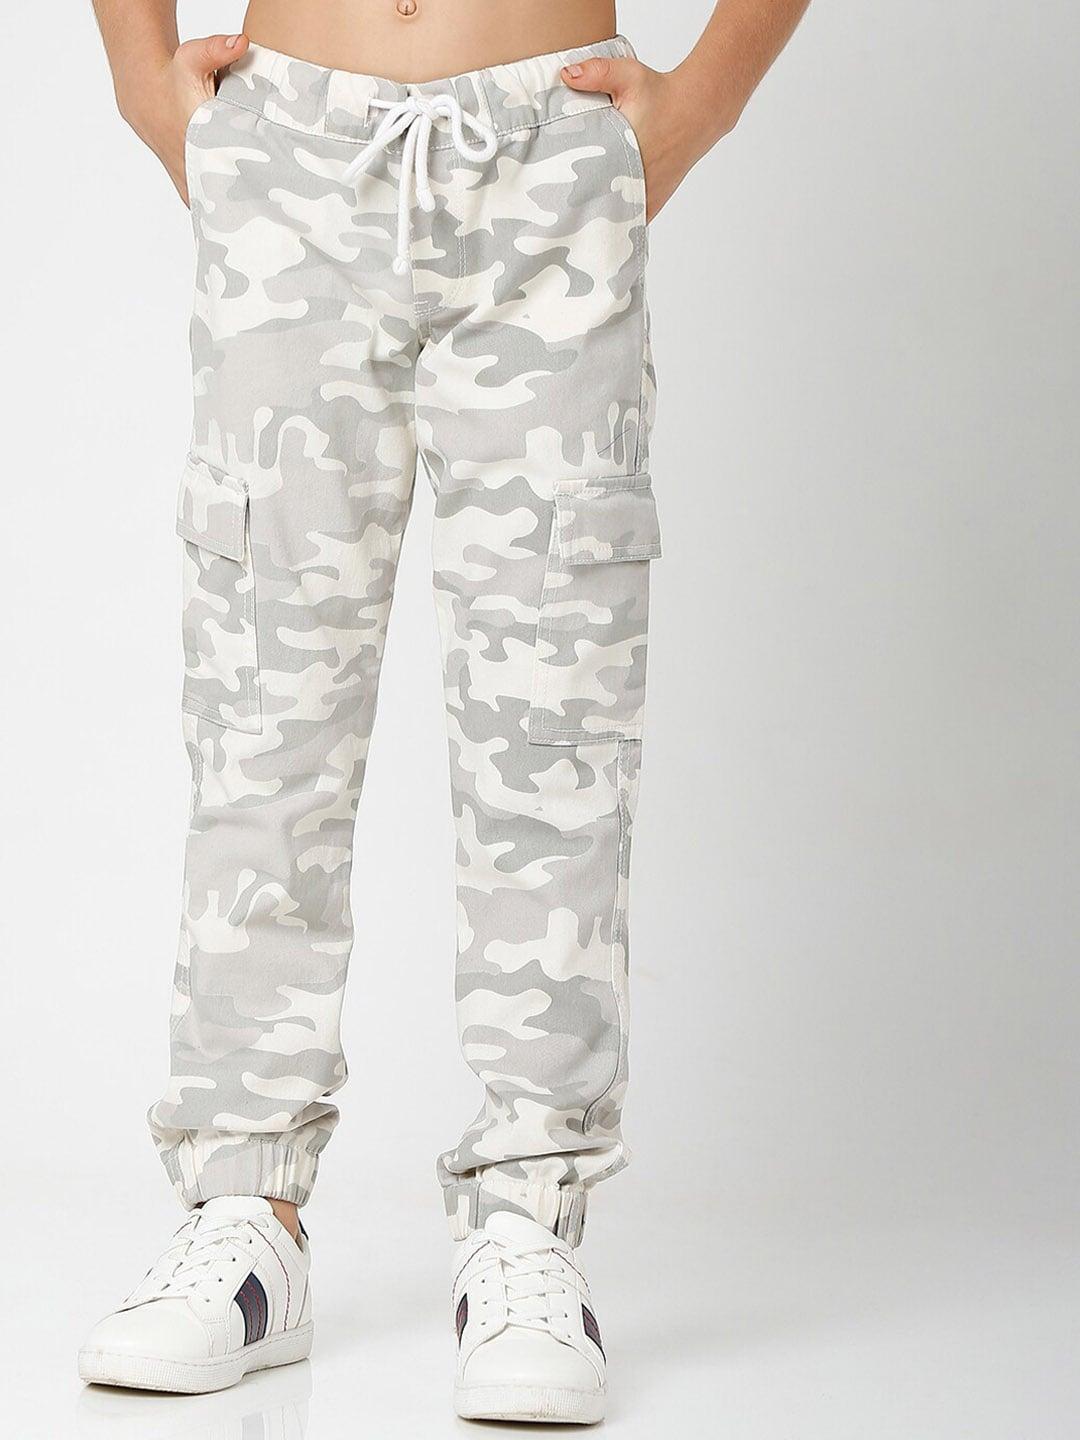 GAS Boys Camouflage Printed Slim Fit Cotton Cargos Trouser